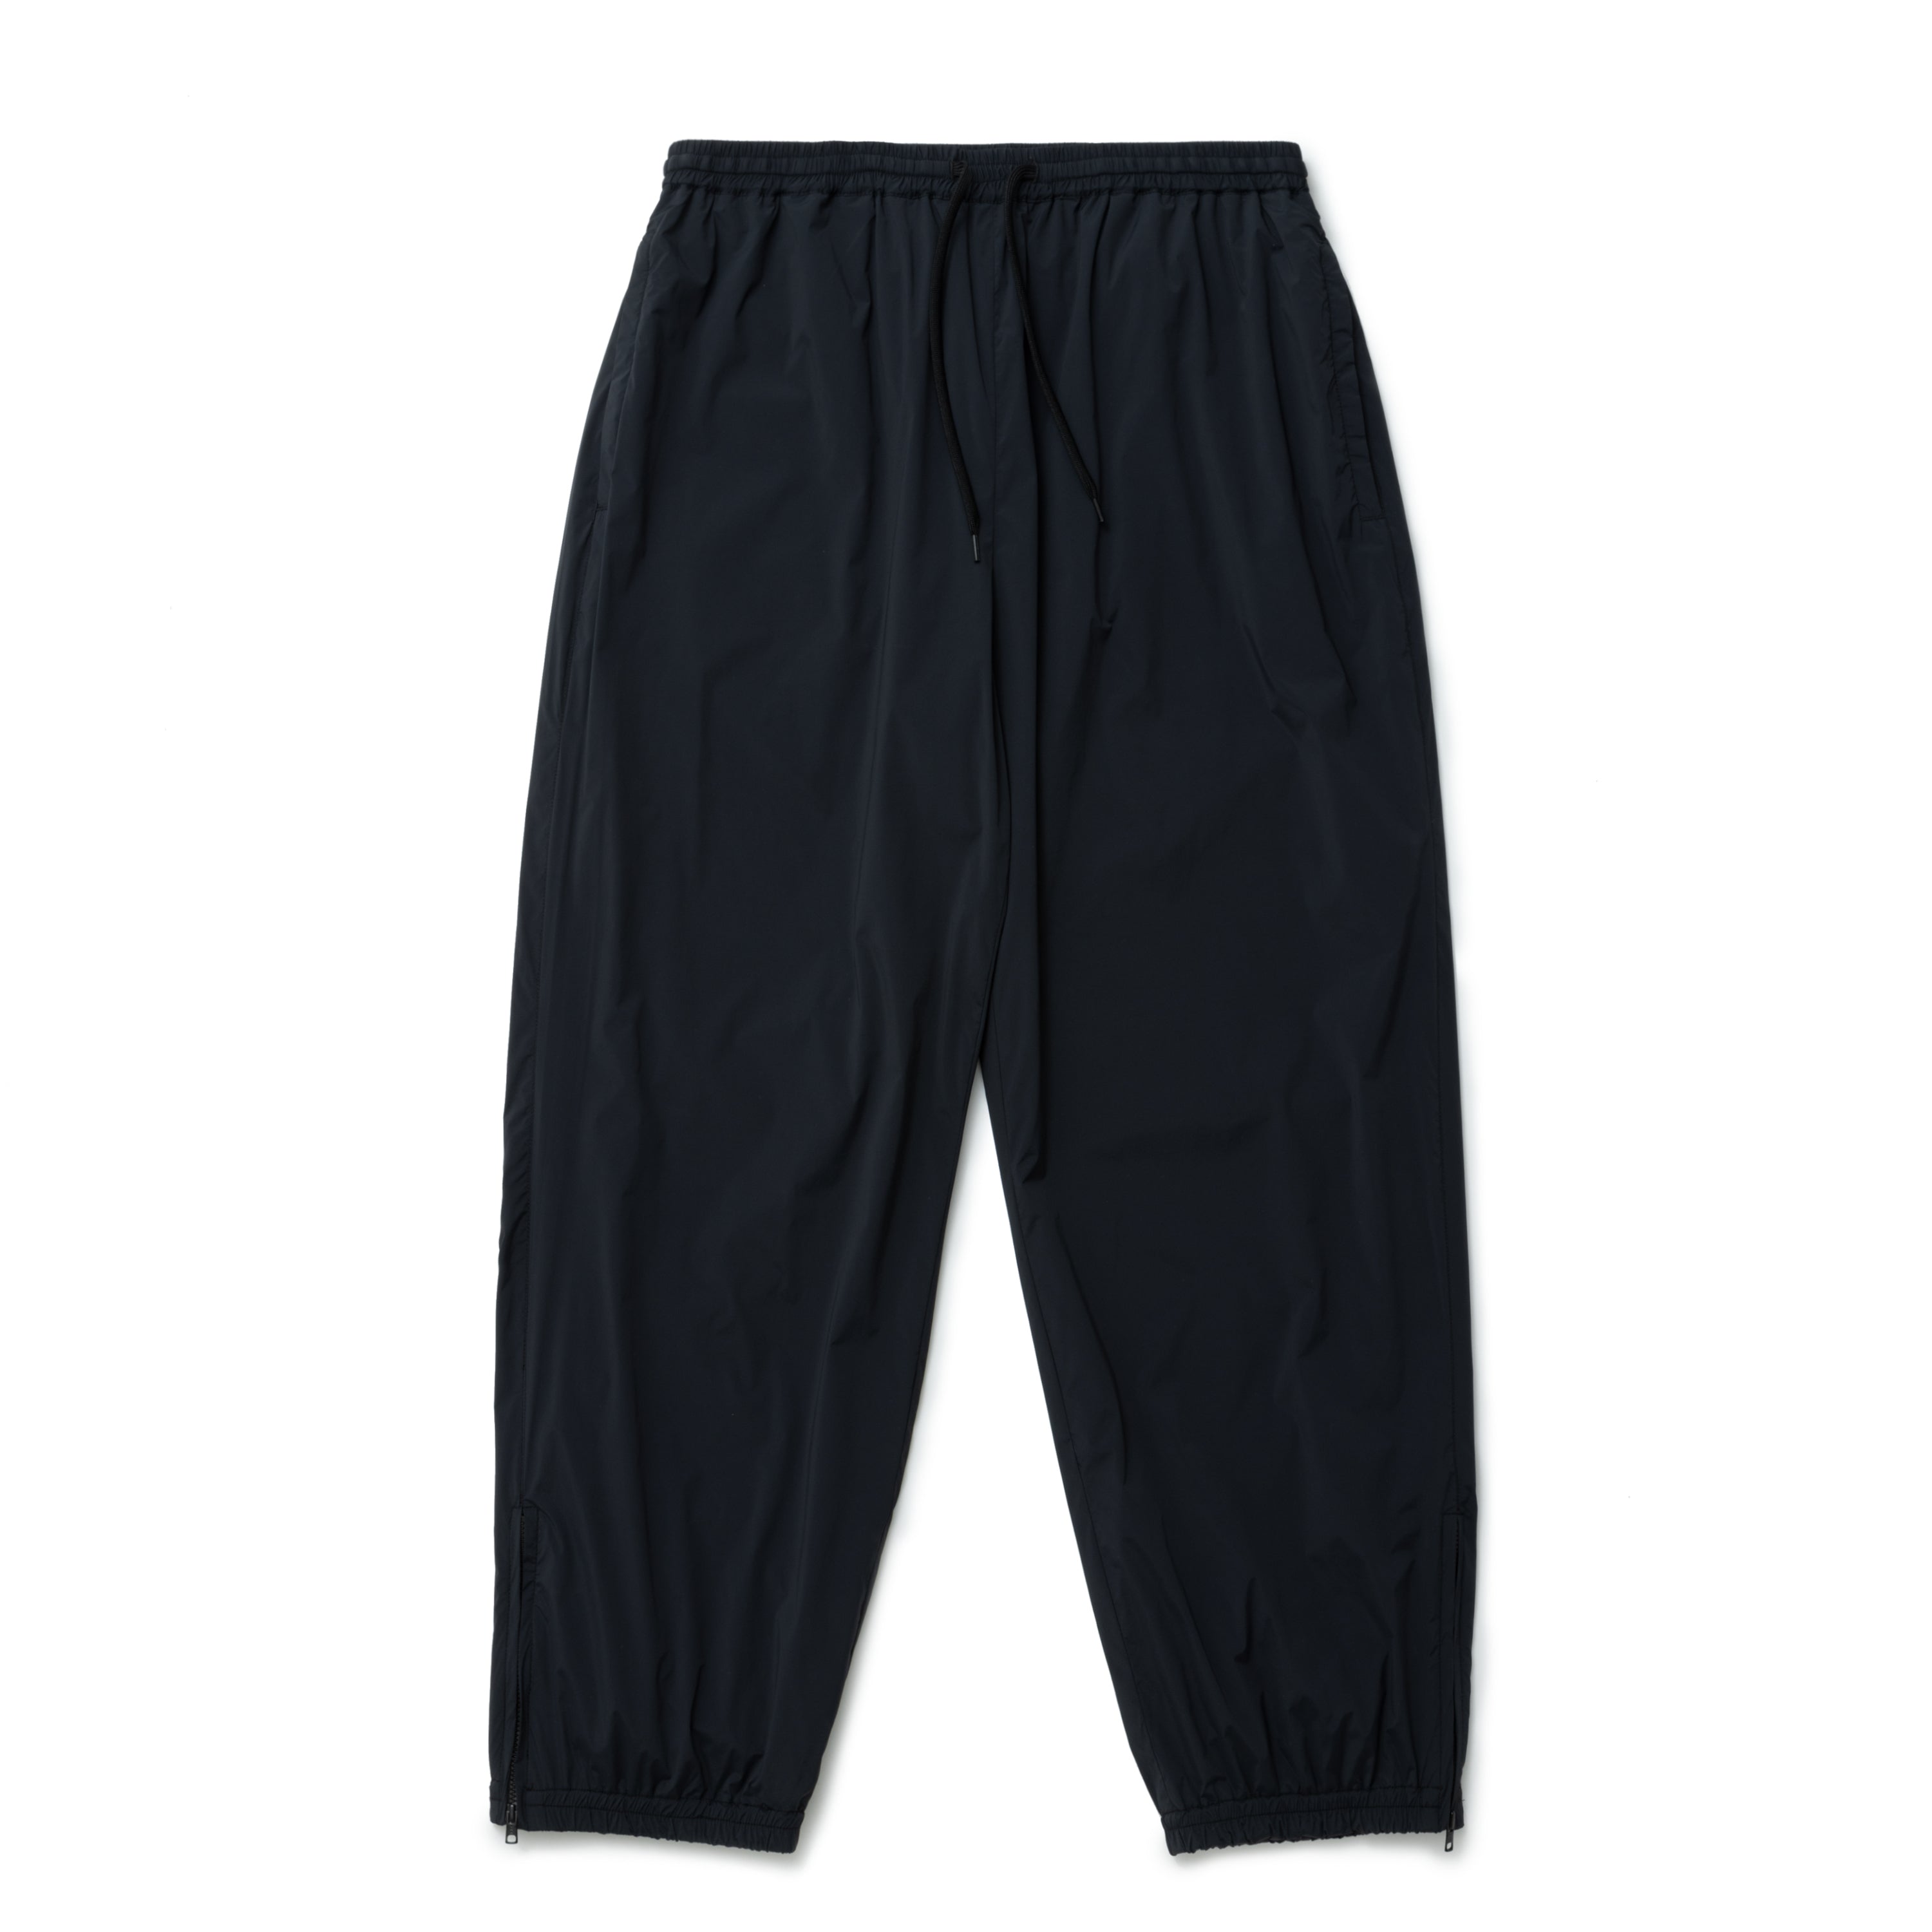 【65%OFF!】 altared T W Wide Track Pants BLACK サイズ2